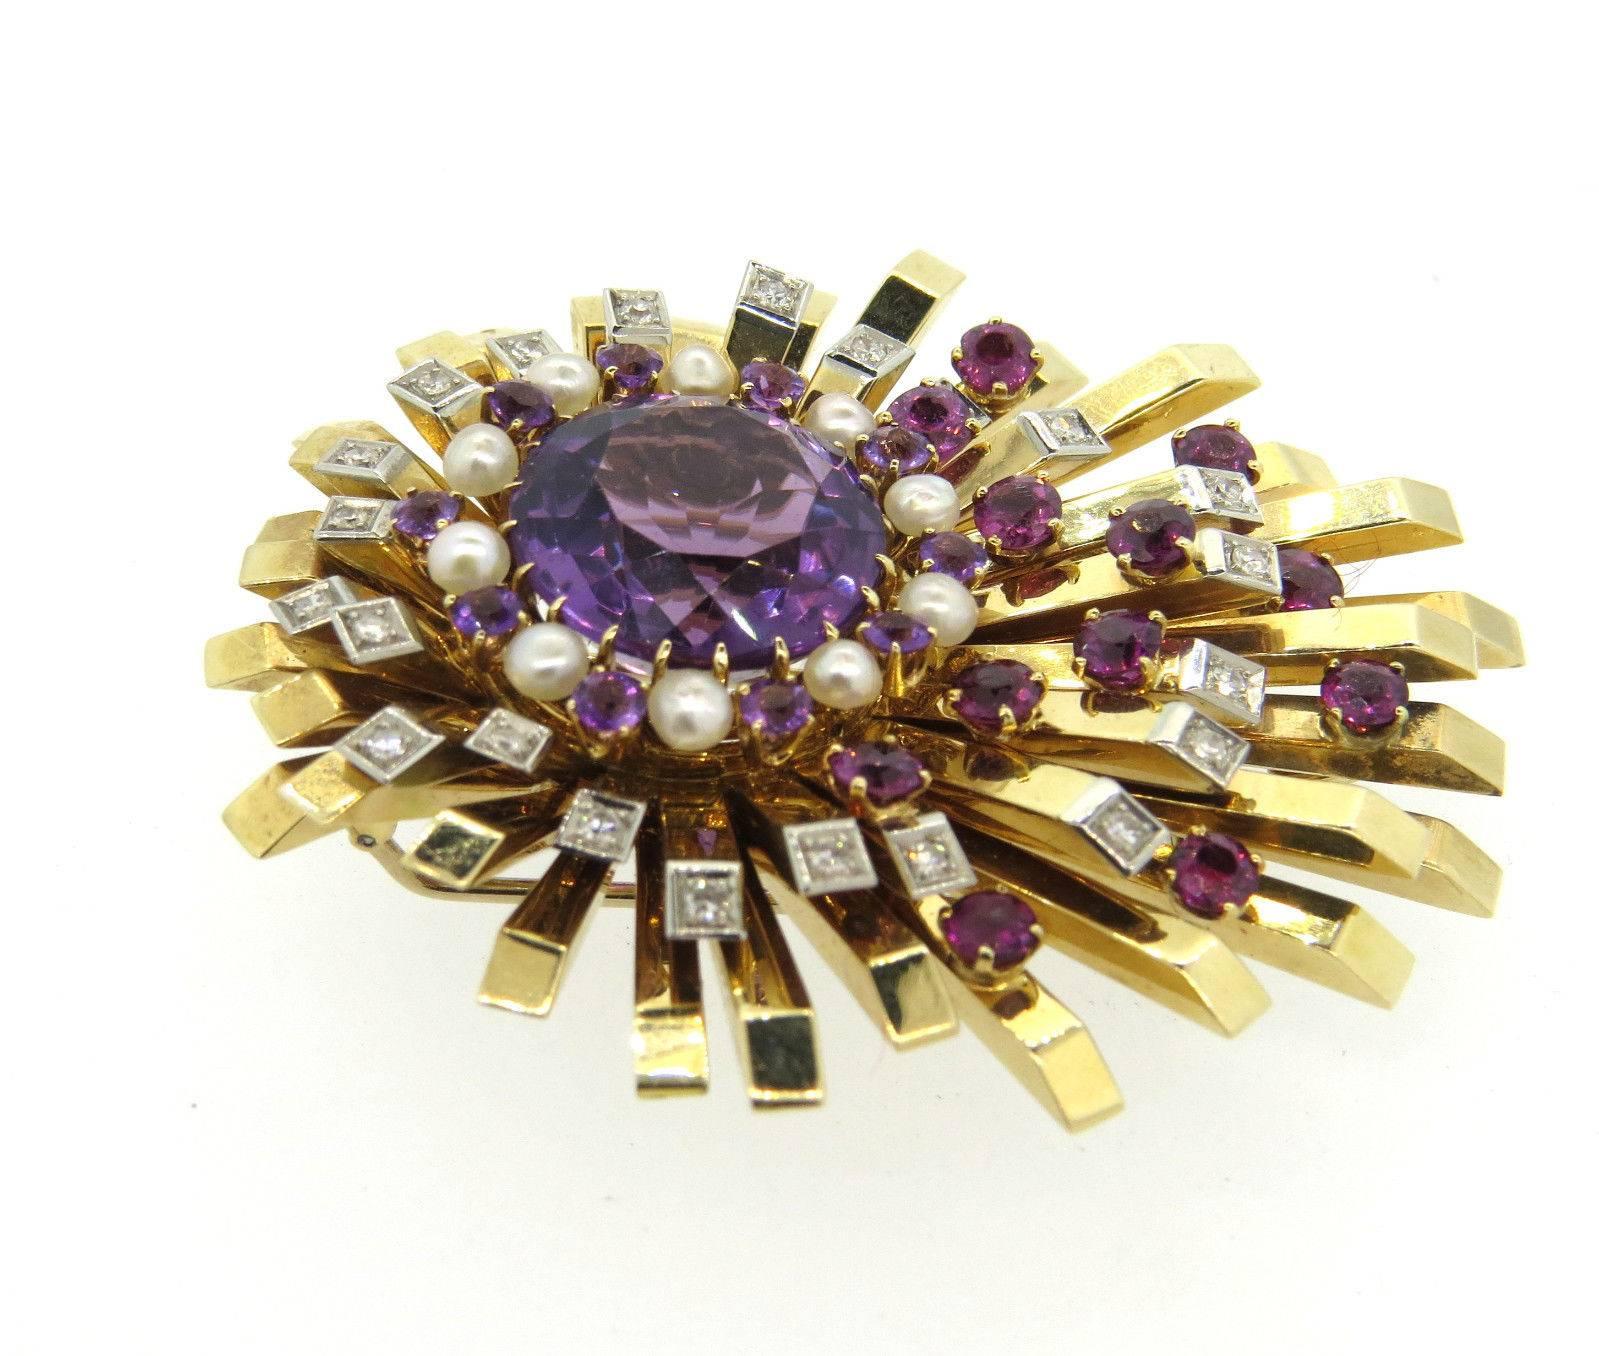 A 14k yellow gold brooch set with approx. 0.50ctw of HI/VS diamonds and pearls amethyst and pink tourmalines. The brooch measures 60mm x 53mm and weighs 43.8 grams.
